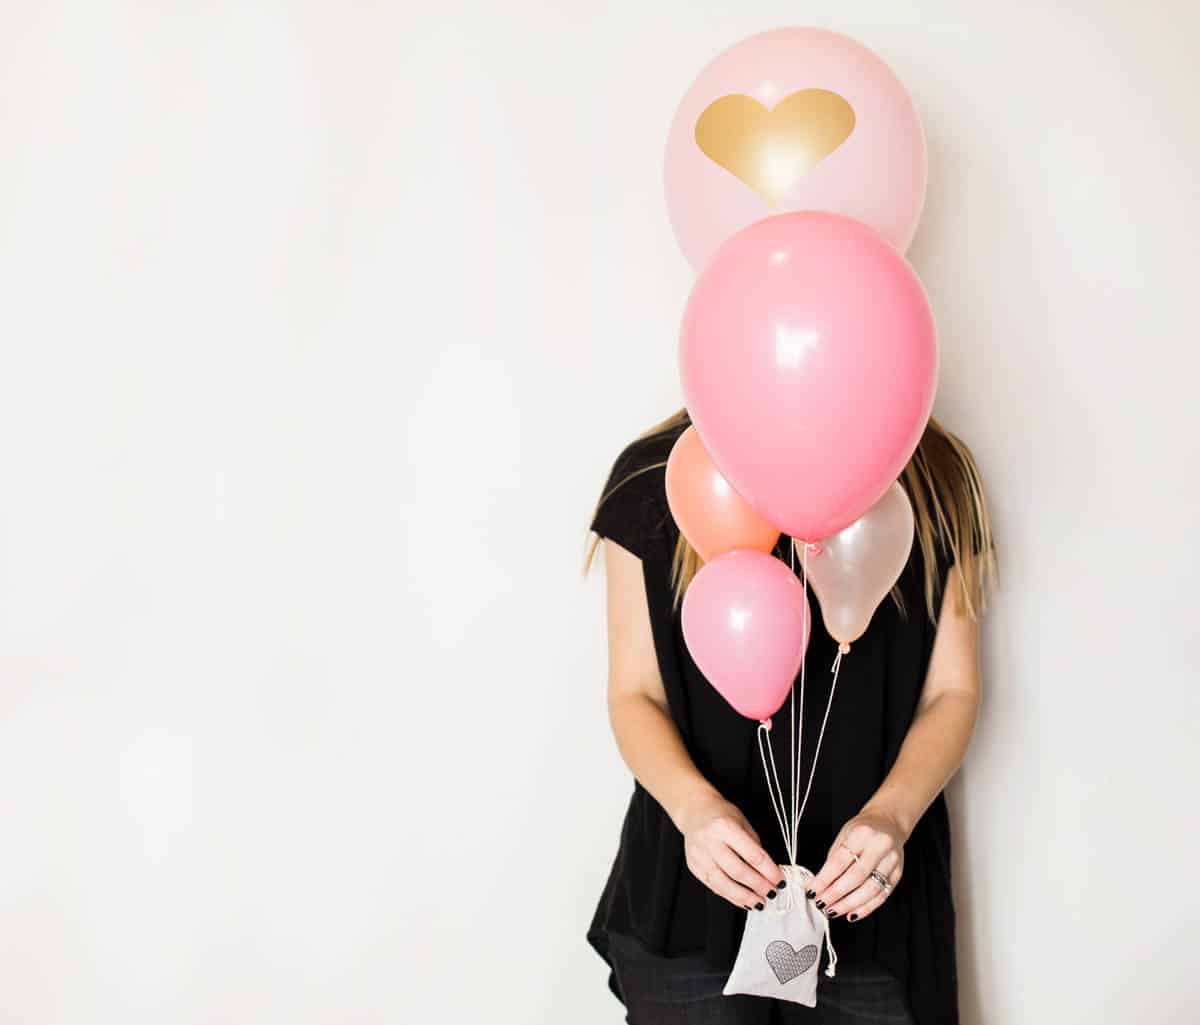 Woman holding a lavender sachet balloon weight attached to a pink balloon bouquet.